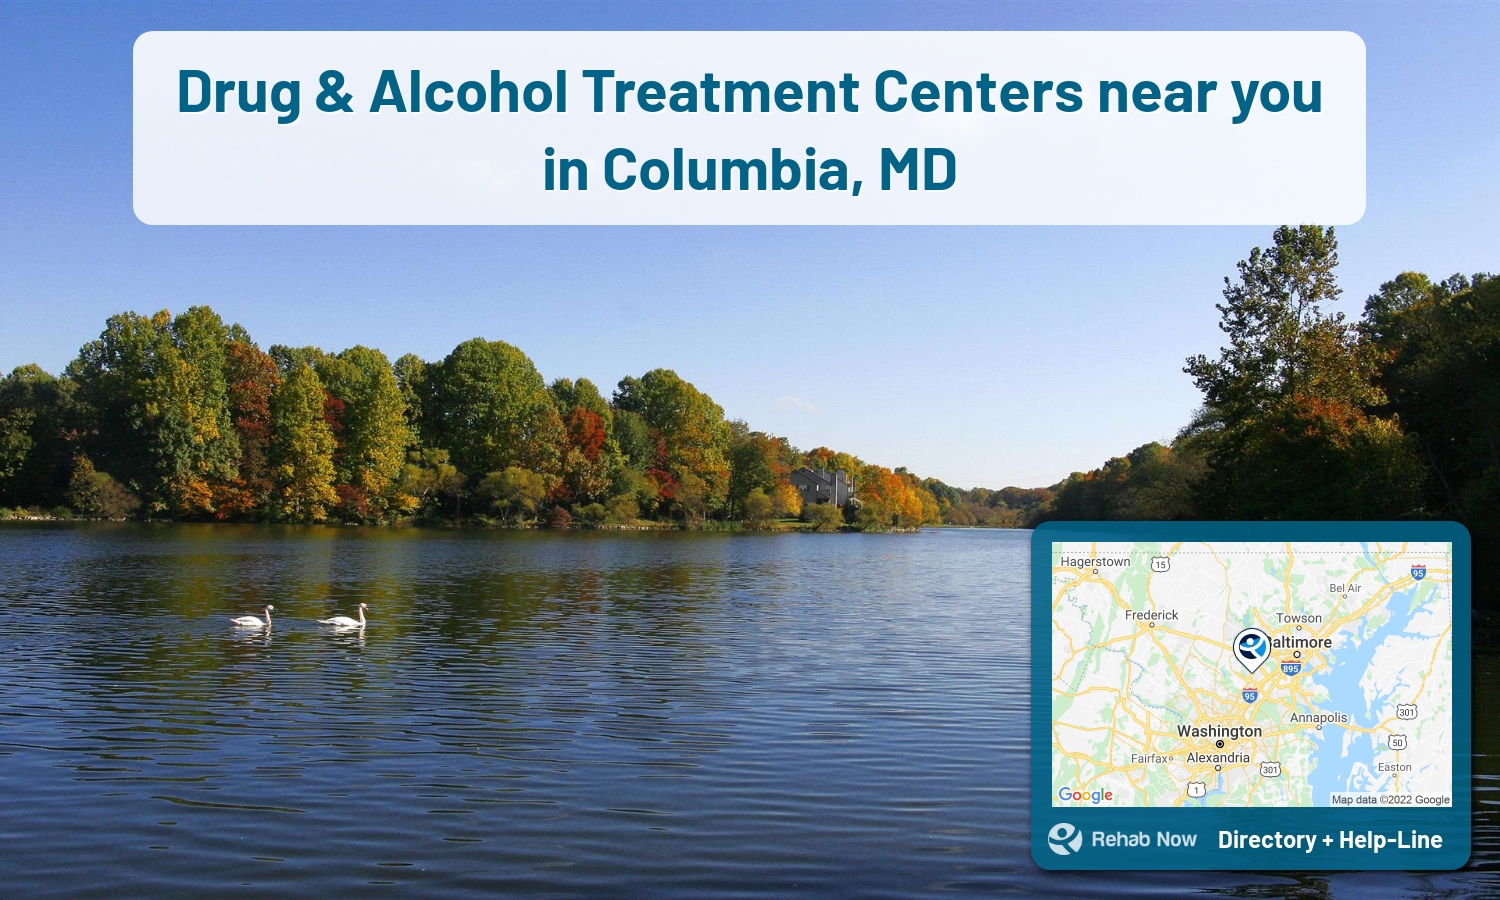 Ready to pick a rehab center in Columbia? Get off alcohol, opiates, and other drugs, by selecting top drug rehab centers in Maryland